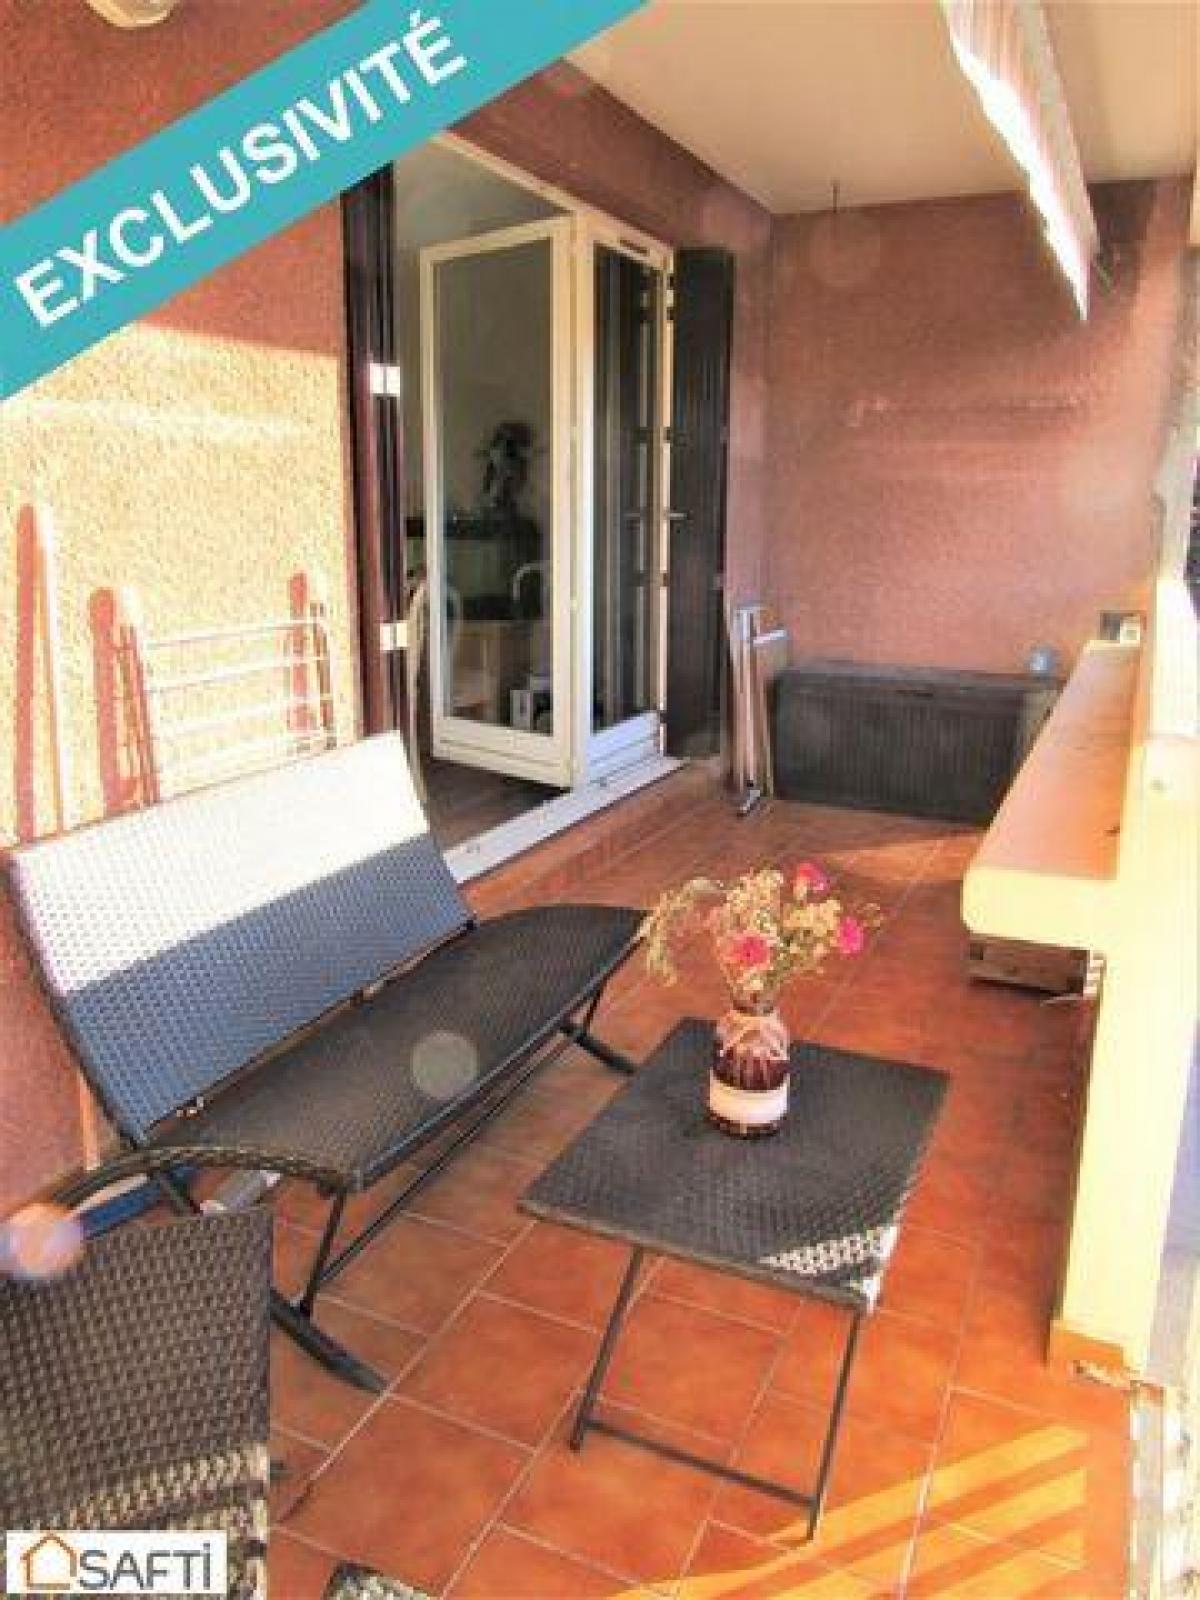 Picture of Apartment For Sale in Aubagne, Provence-Alpes-Cote d'Azur, France